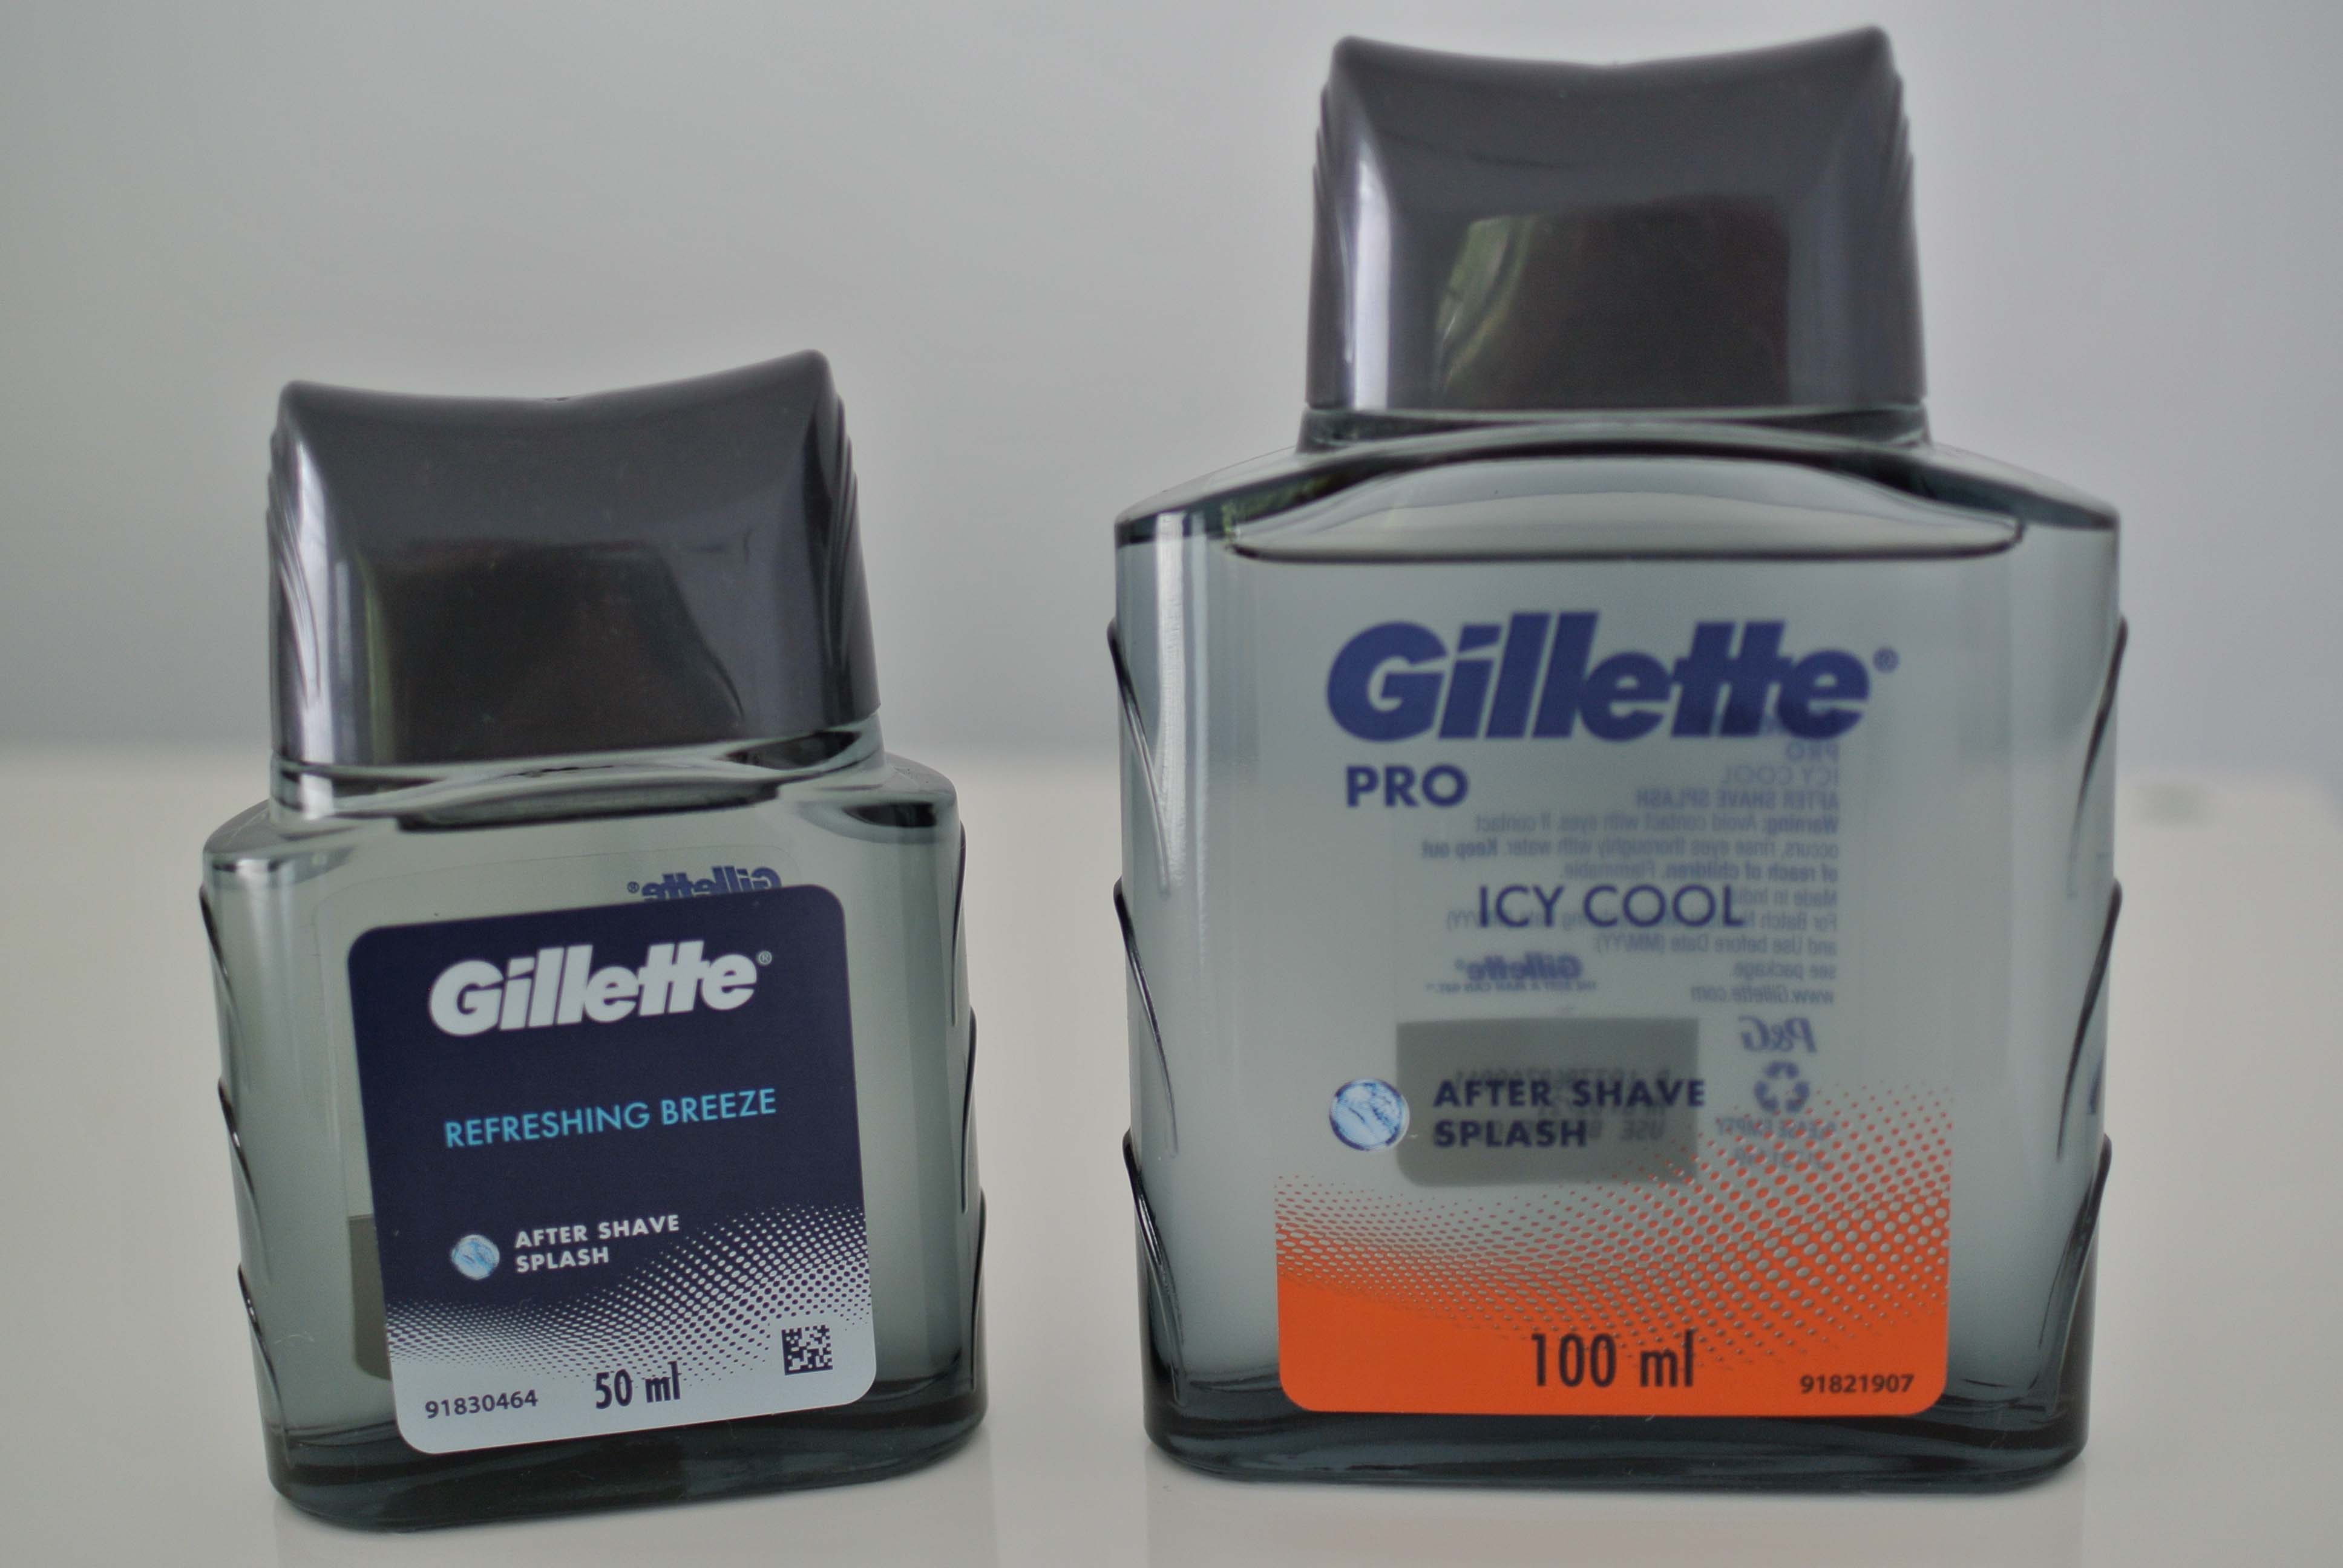 
Gillette Icy Cool and Refreshing Breeze bottles
